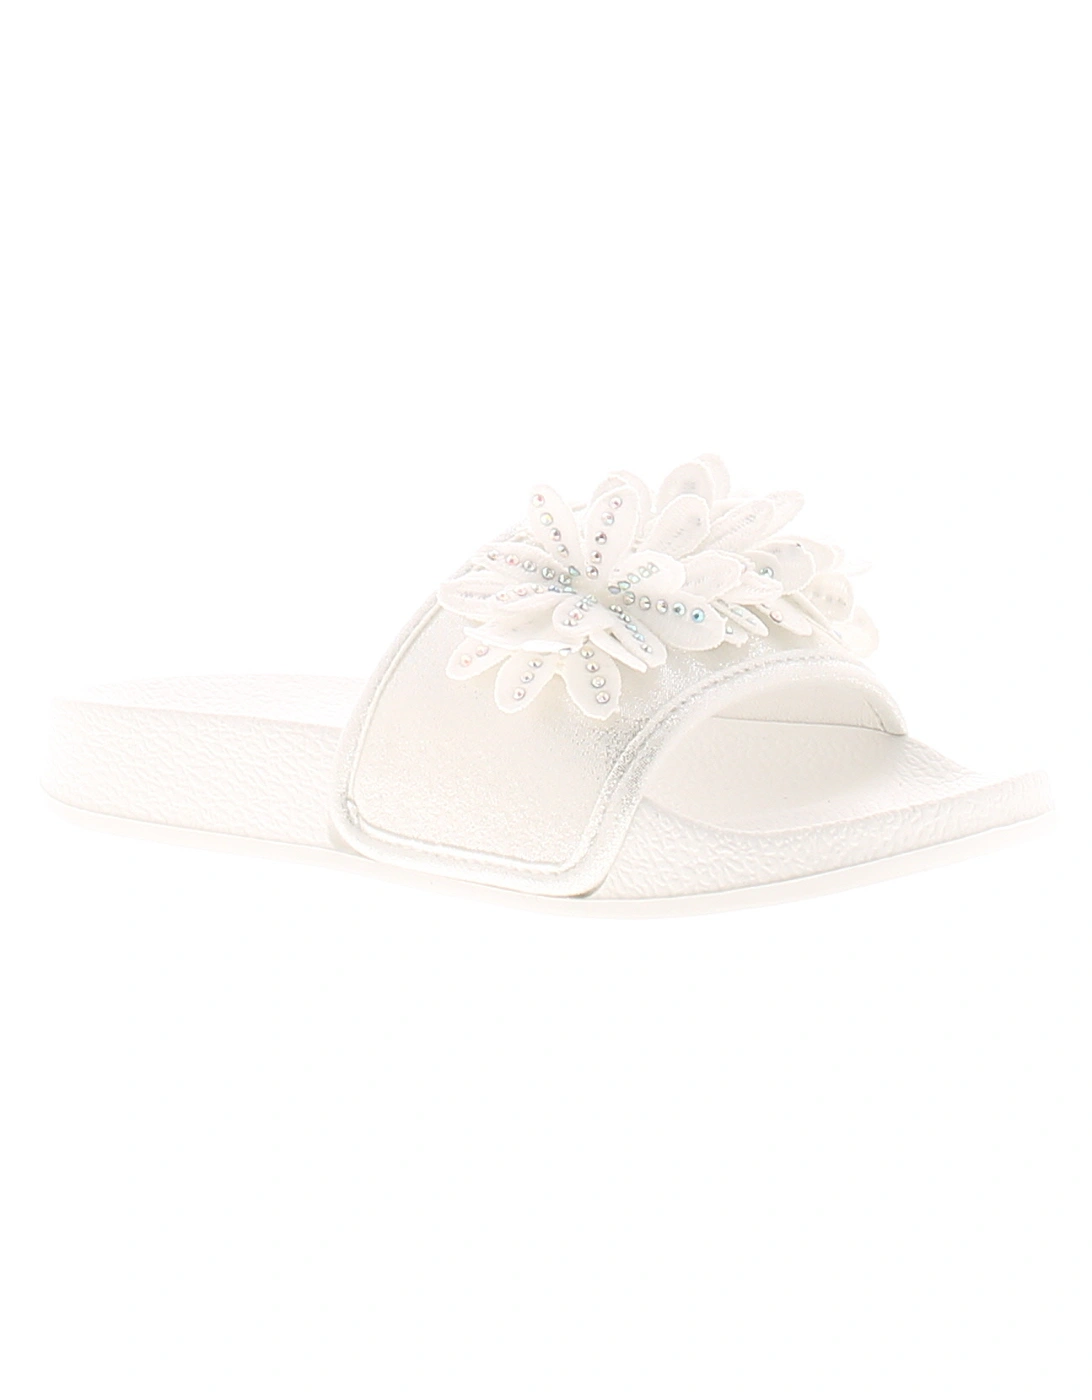 Girls Sandals Sliders Younger Damsel white UK Size, 6 of 5